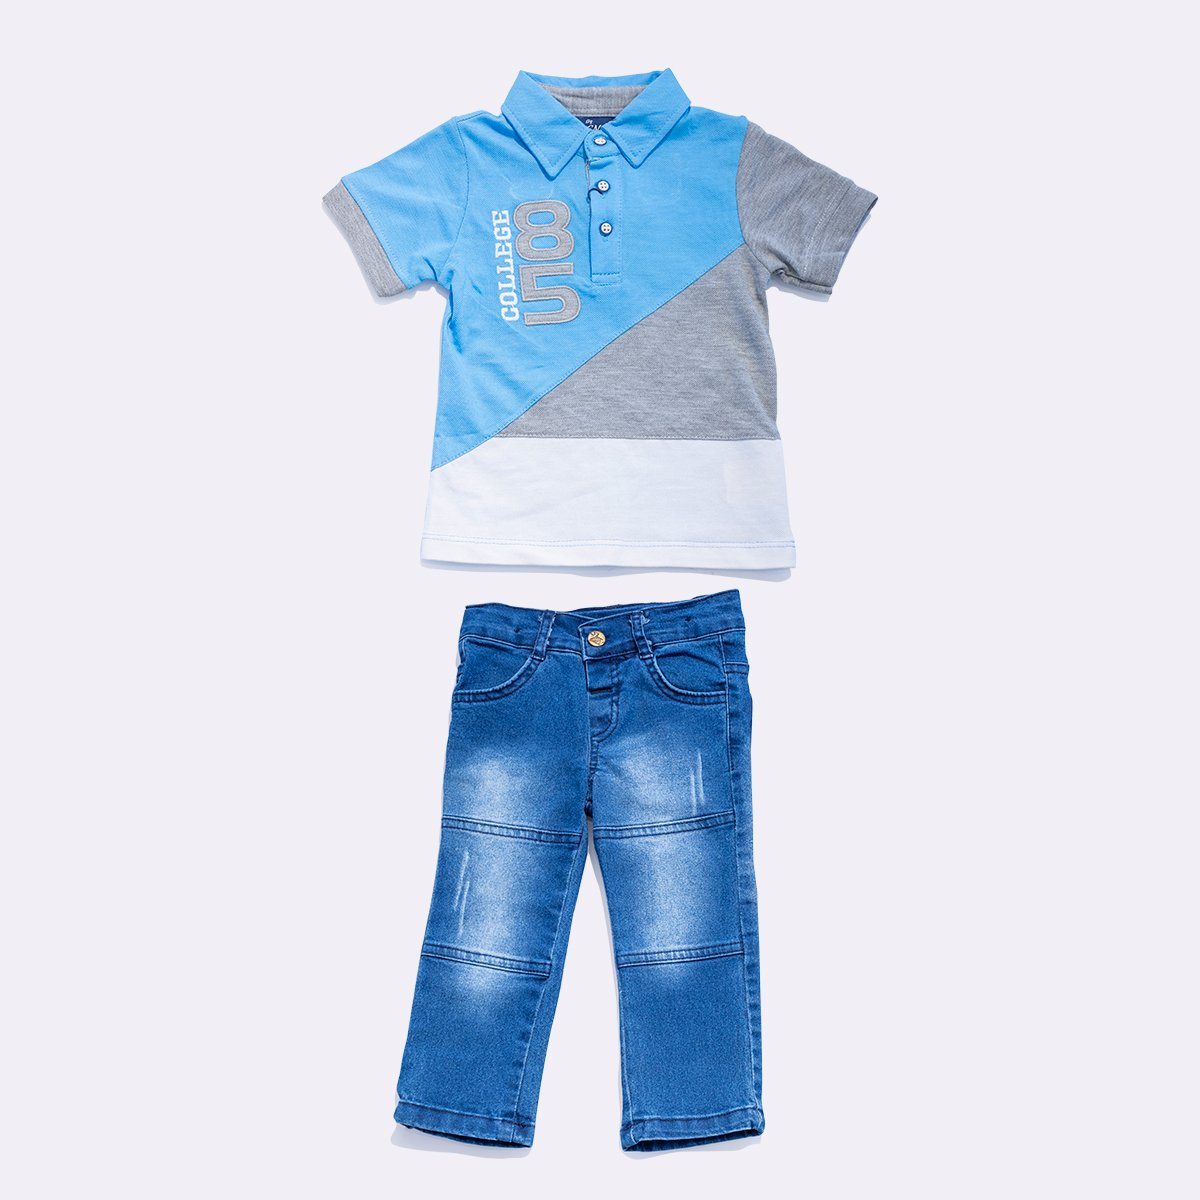 85 Boys Polo & Jeans Set - Blue General By CNS 